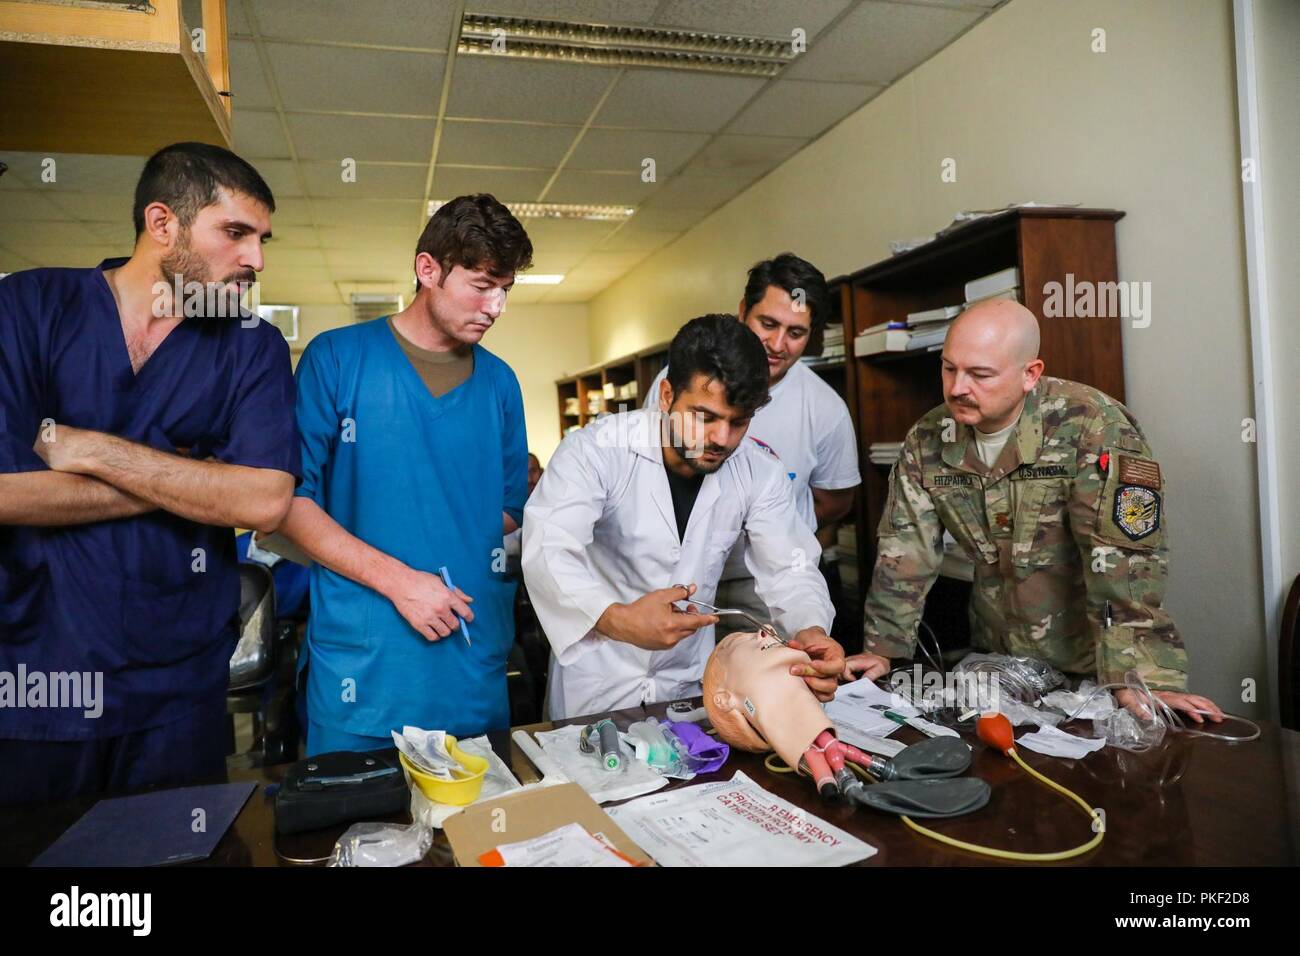 KANDAHAR PROVINCE, Afghanistan (August 5, 2018) -- U.S. Navy Lt. Cdr. Travis J. Fitzpatrick, senior nurse for Kandahar Airfield NATO Role III Multinational Medical Unit, observes as Afghan medical staff members demonstrate how to open an airway, August 5, 2018, during a medical advisory visit at Kandahar Regional Military Hospital, Camp Hero in Kandahar, Afghanistan. Staff members from the Role III conduct routine visits to KRMH to train and advise Afghan medical staff. Stock Photo